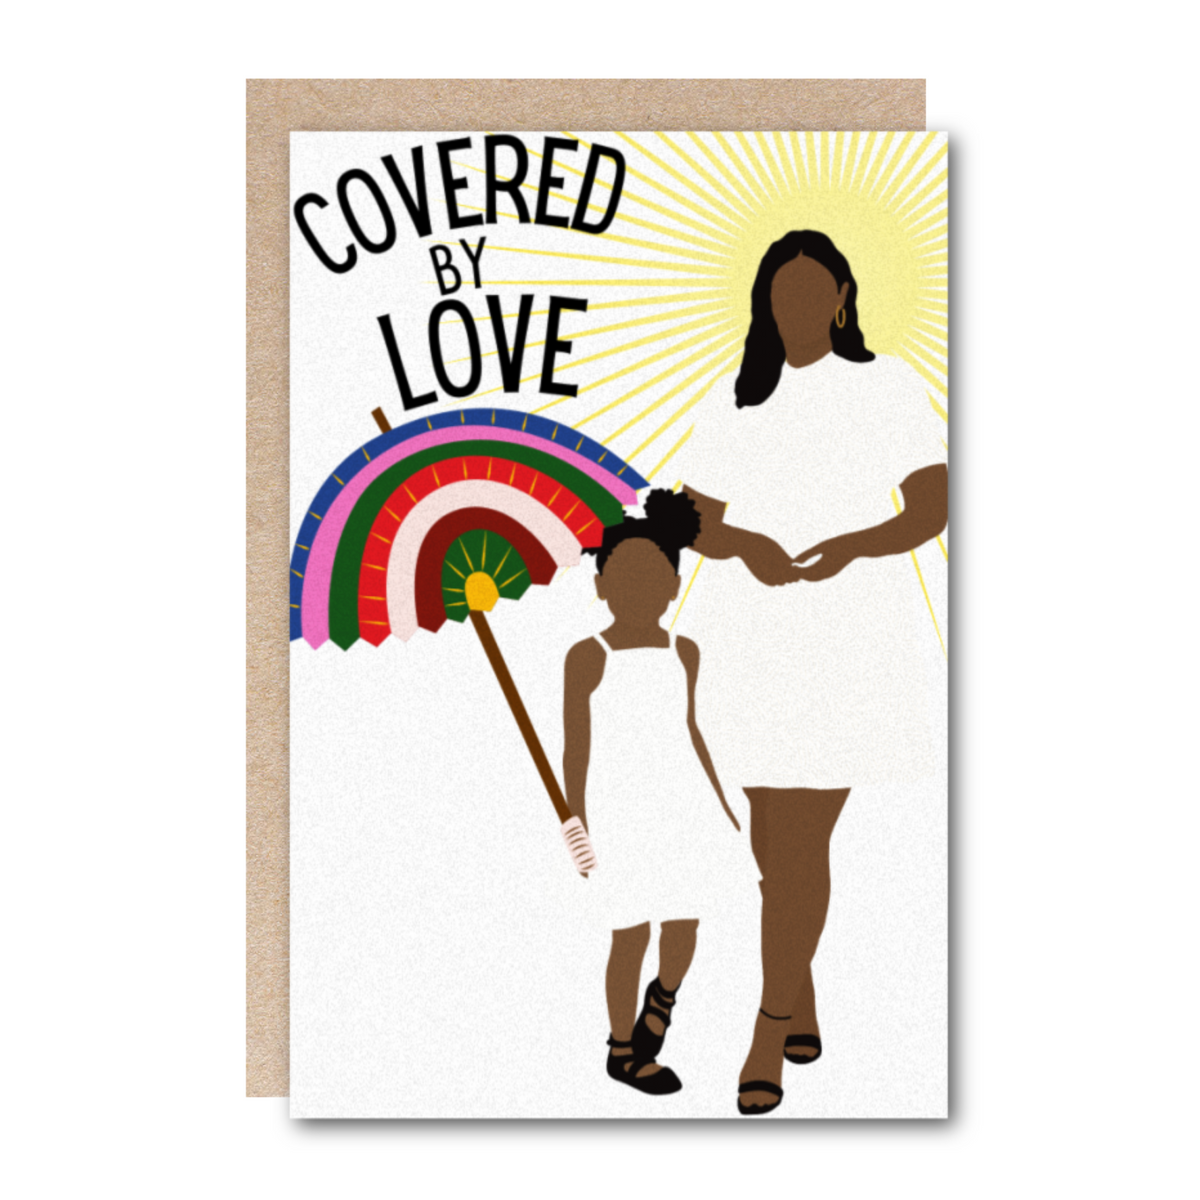 Covered By Love